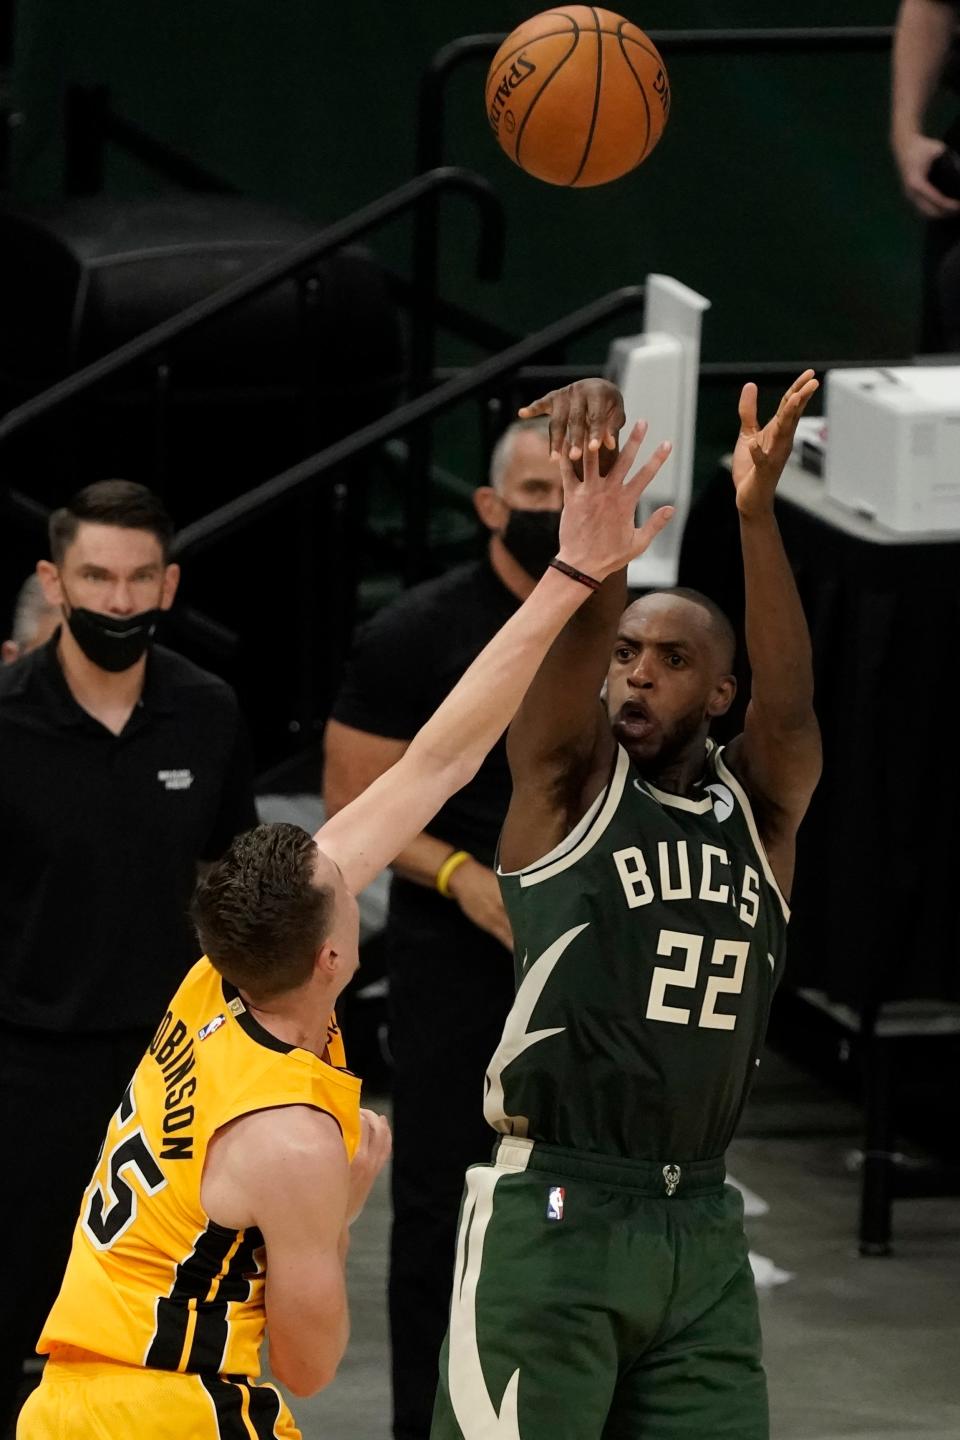 Milwaukee Bucks' Khris Middleton makes a basket over Miami Heat's Duncan Robinson in the final seconds of overtime of Game 1 of their NBA basketball first-round playoff seriesSaturday, May 22, 2021, in Milwaukee. The Bucks won 109-107 to take a 1-0 lead in the series. (AP Photo/Morry Gash)